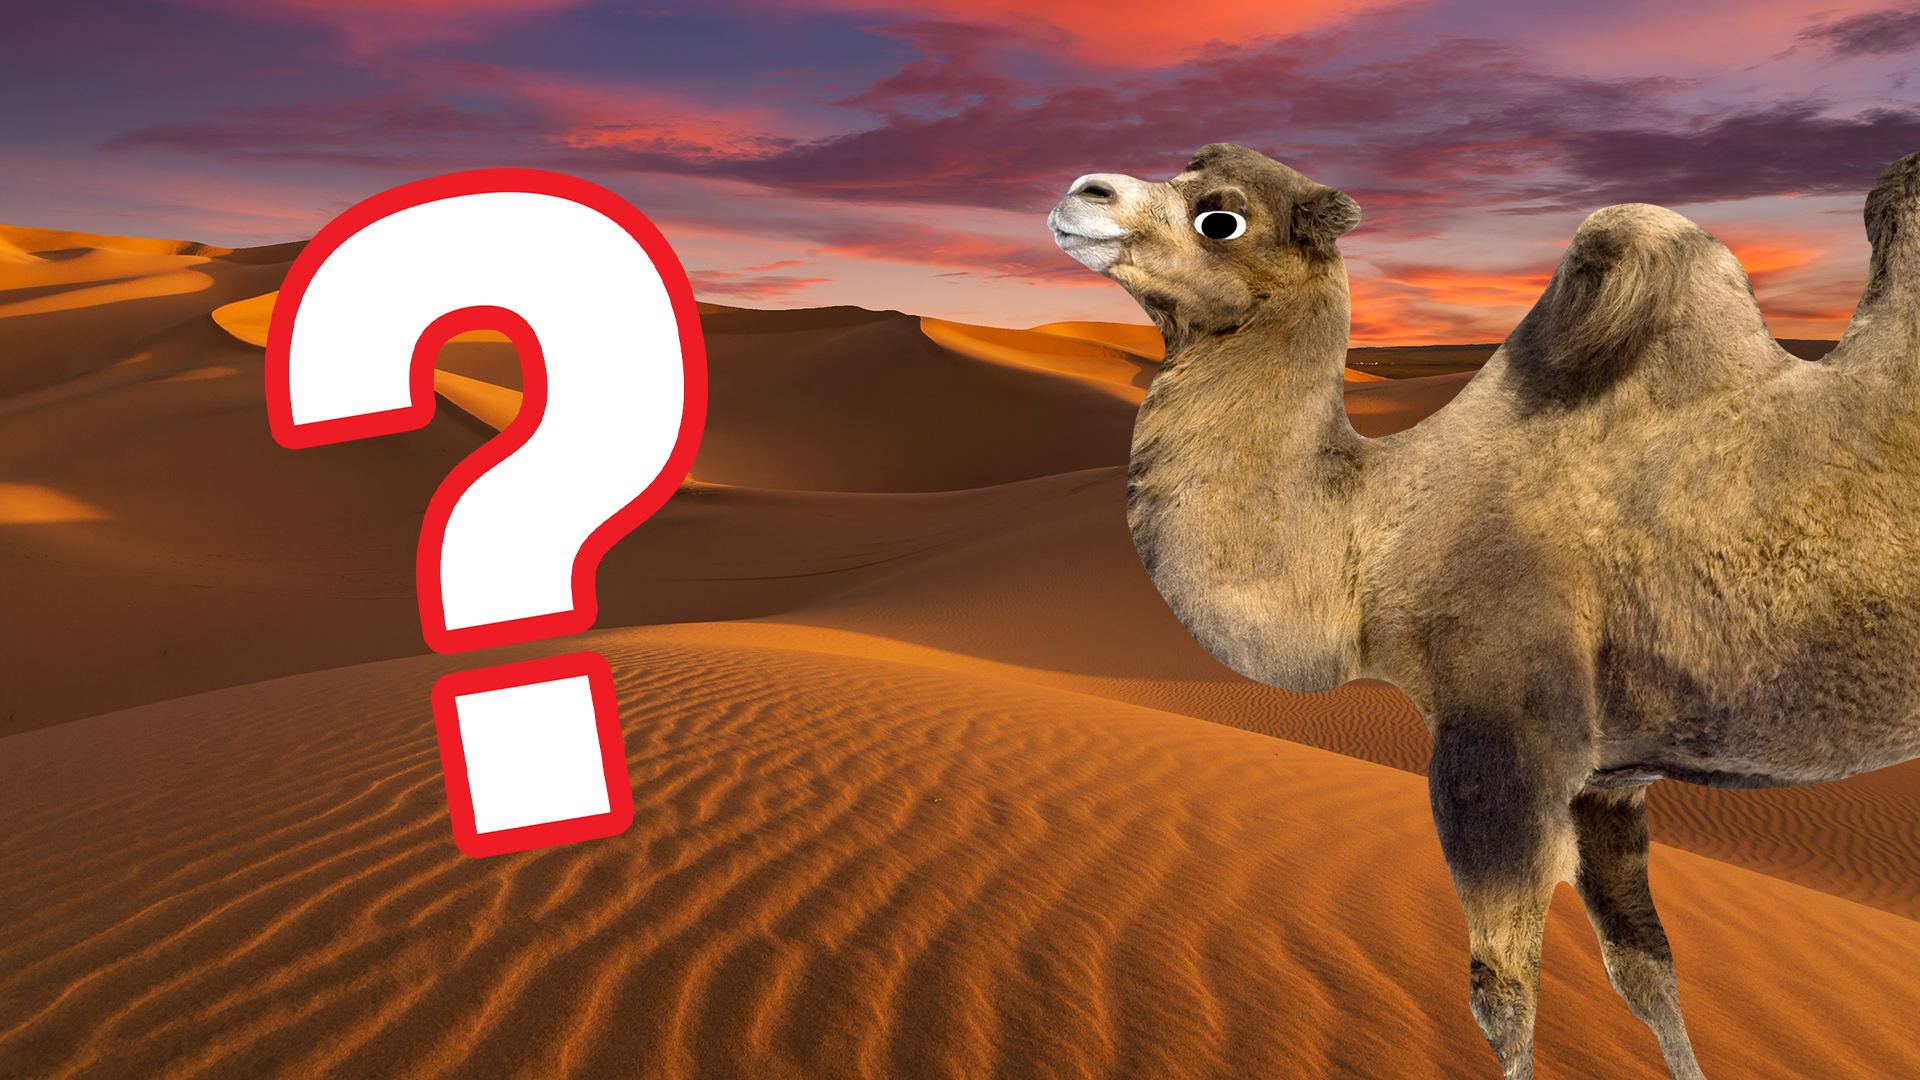 Beano camel and question mark in desert